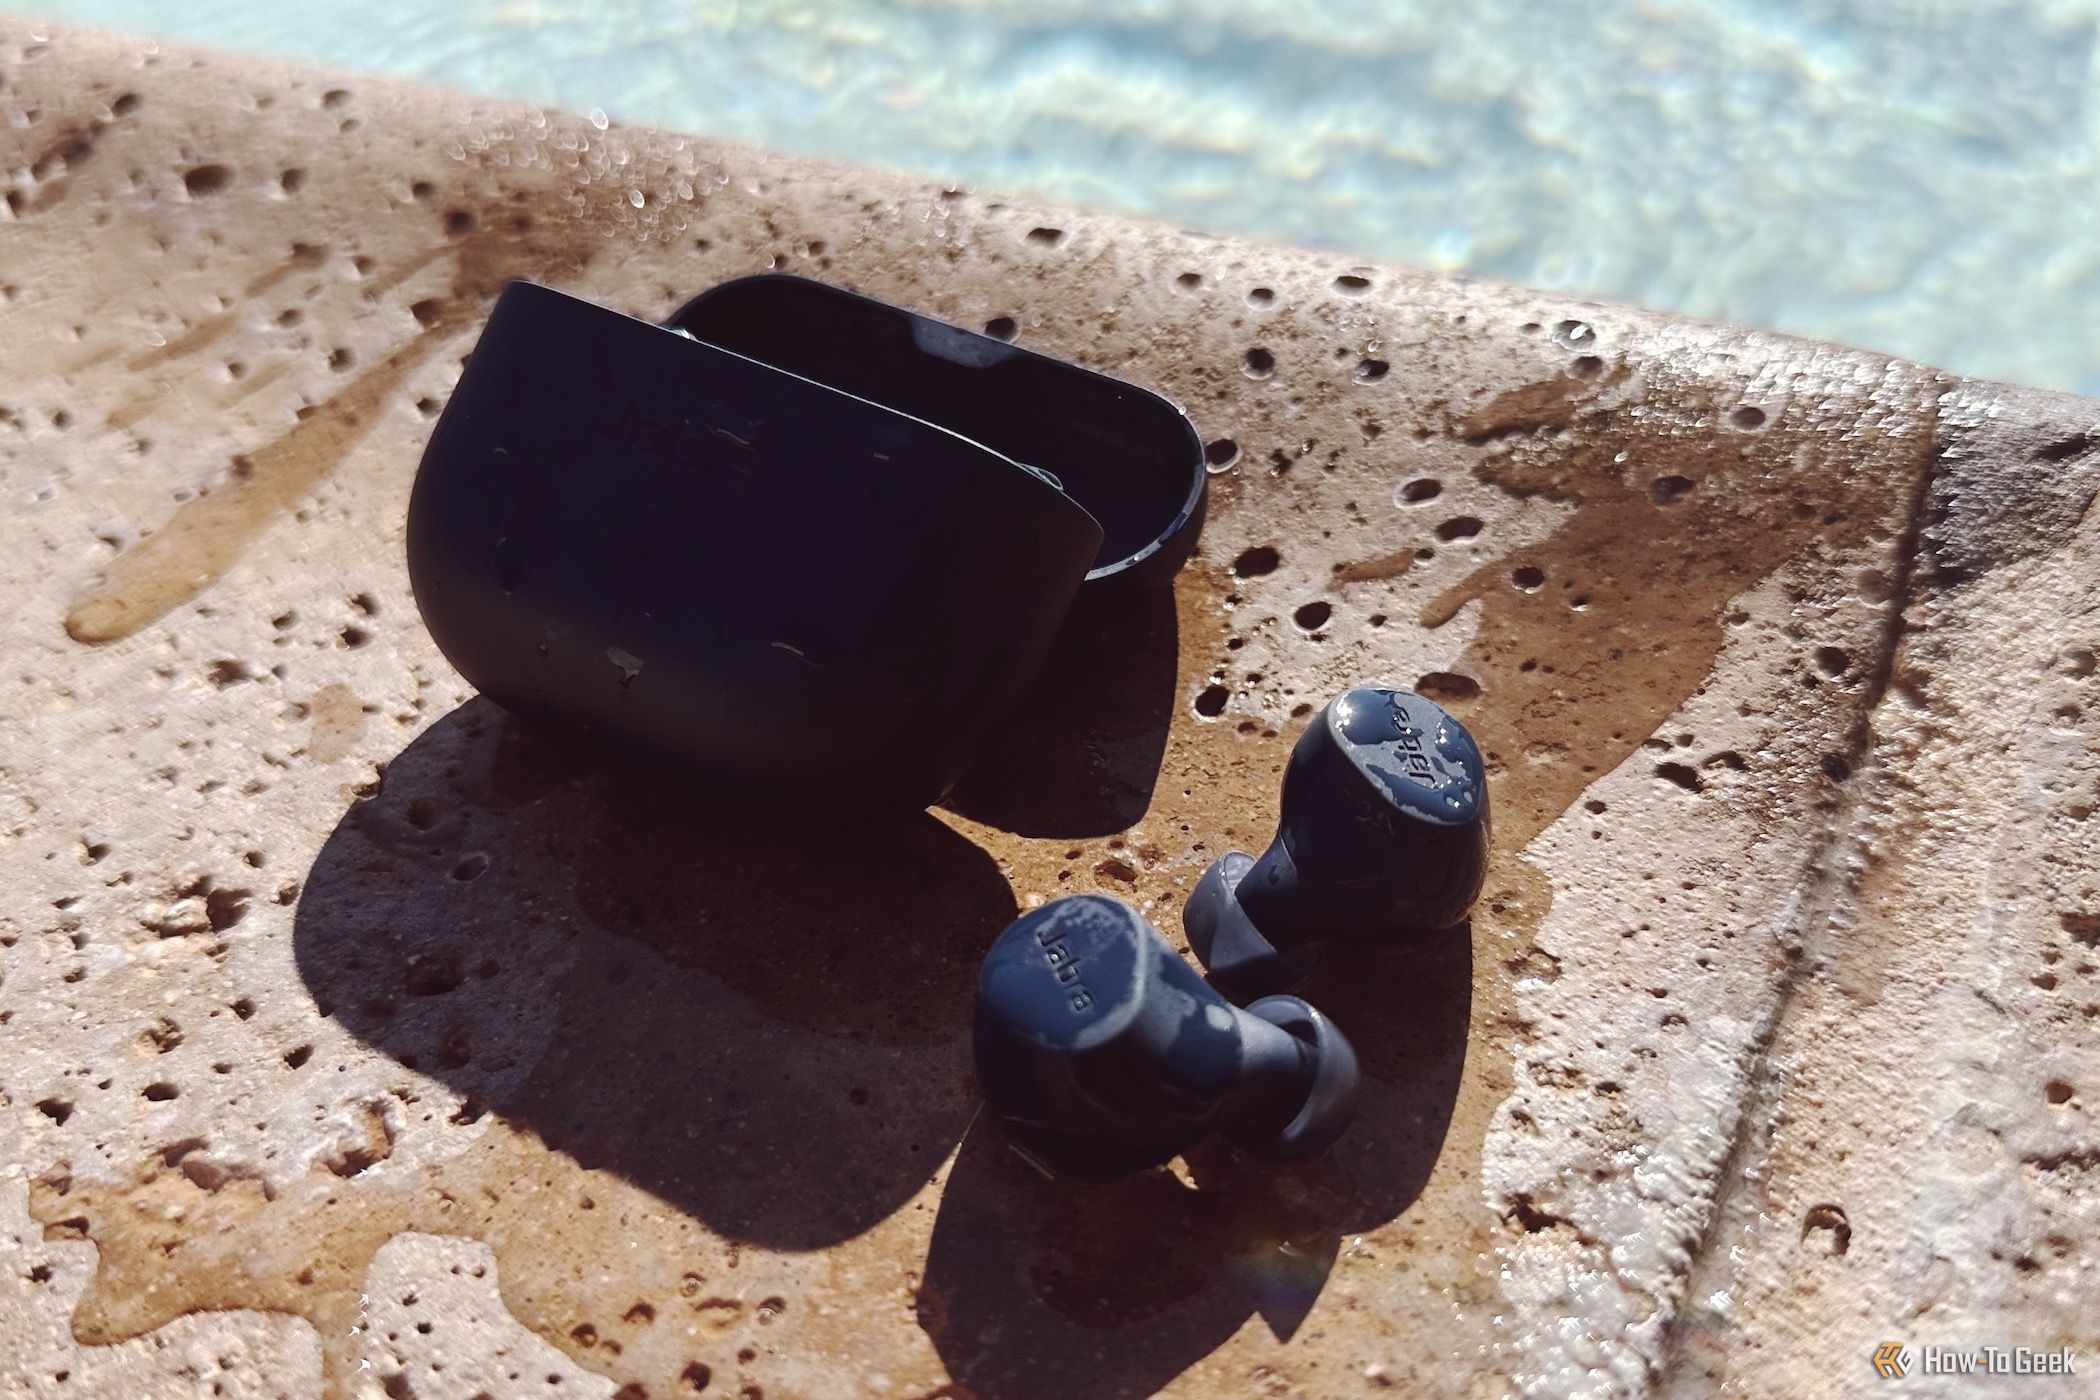 Elite 8 Active earbuds dripping with water from going in a pool